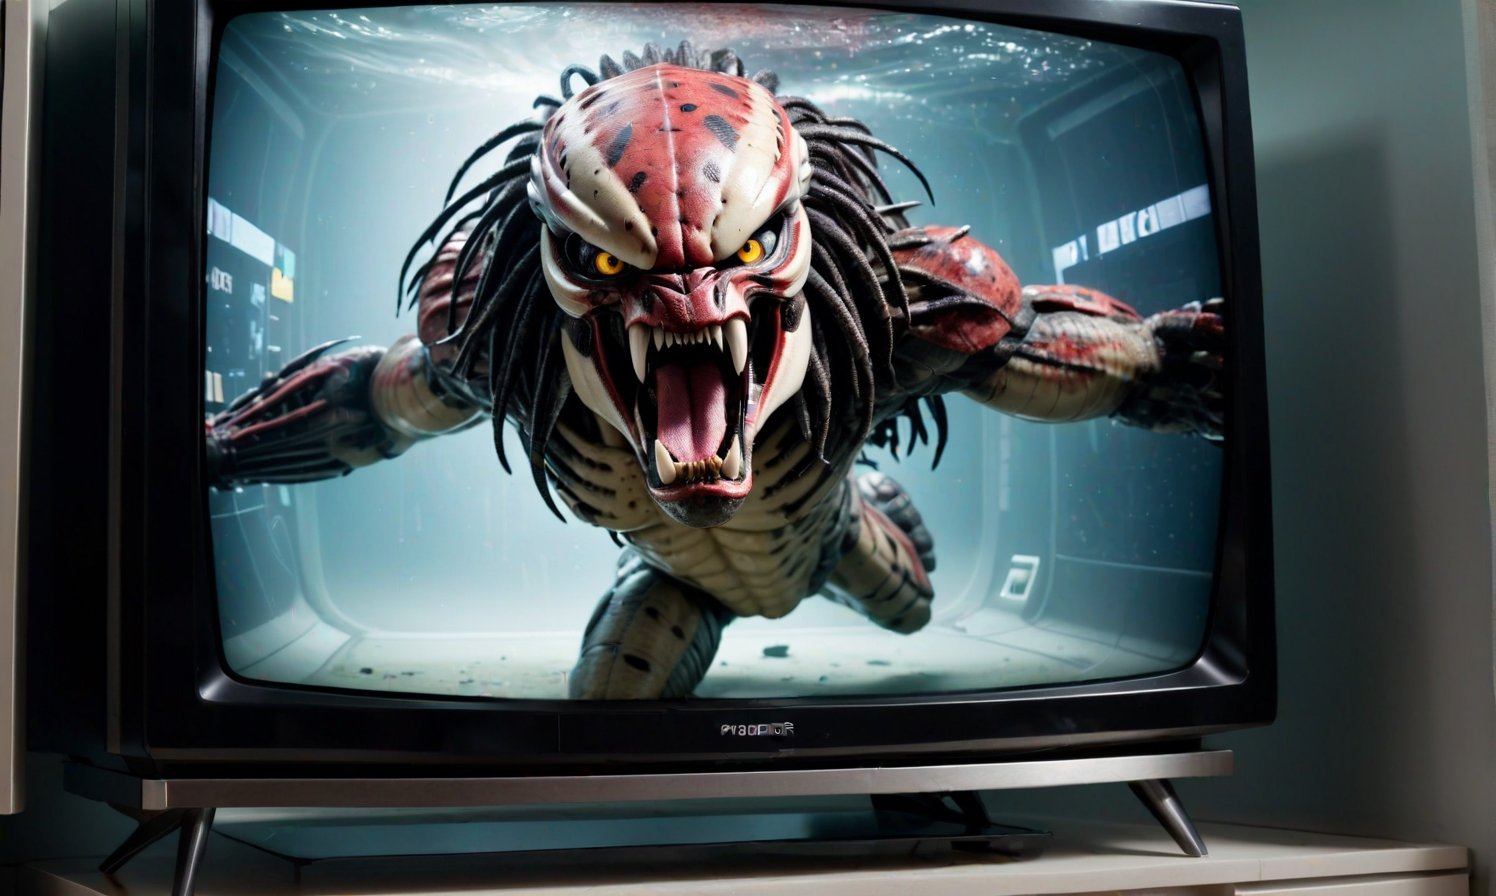 POV you looking at: a double exposure view of a: hyper surreal realistic picture of the Predator trying to escape a TV, ((cracking the screen of the TV:1.2)),3D MODEL